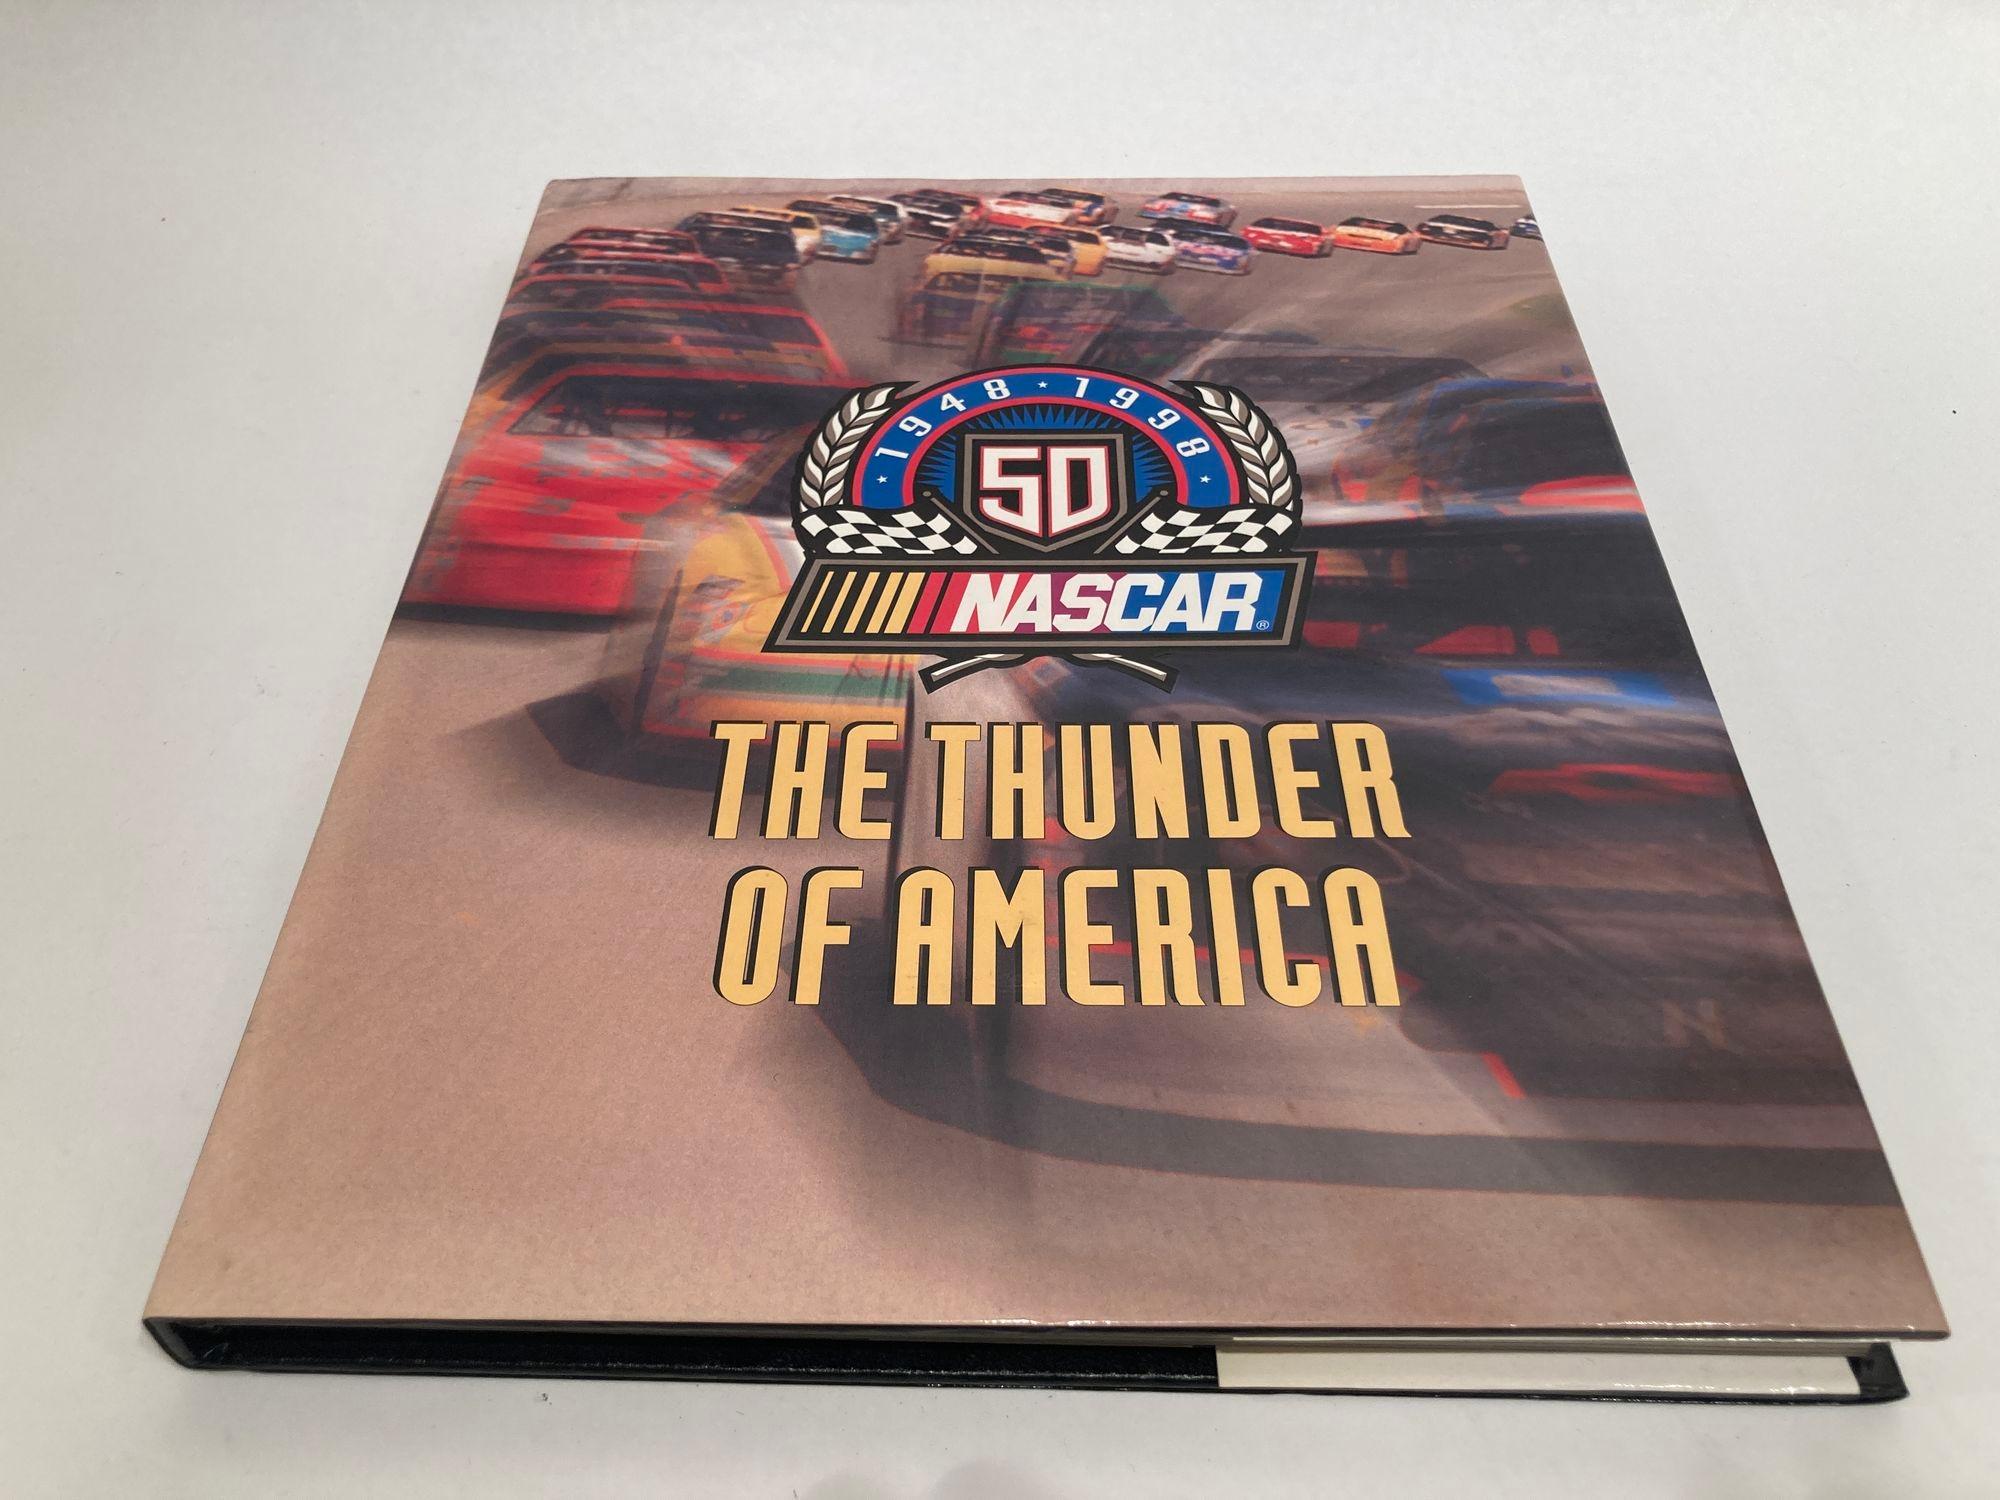 NASCAR: The Thunder of America.Thunder Of America: 50th Anniversary of NASCAR hardcover 1988.Published by Harper, 1988.200 pages of NASCAR history, info, stats and photos.Hardcover with dust jacket.Photographs and text help capture the most exciting